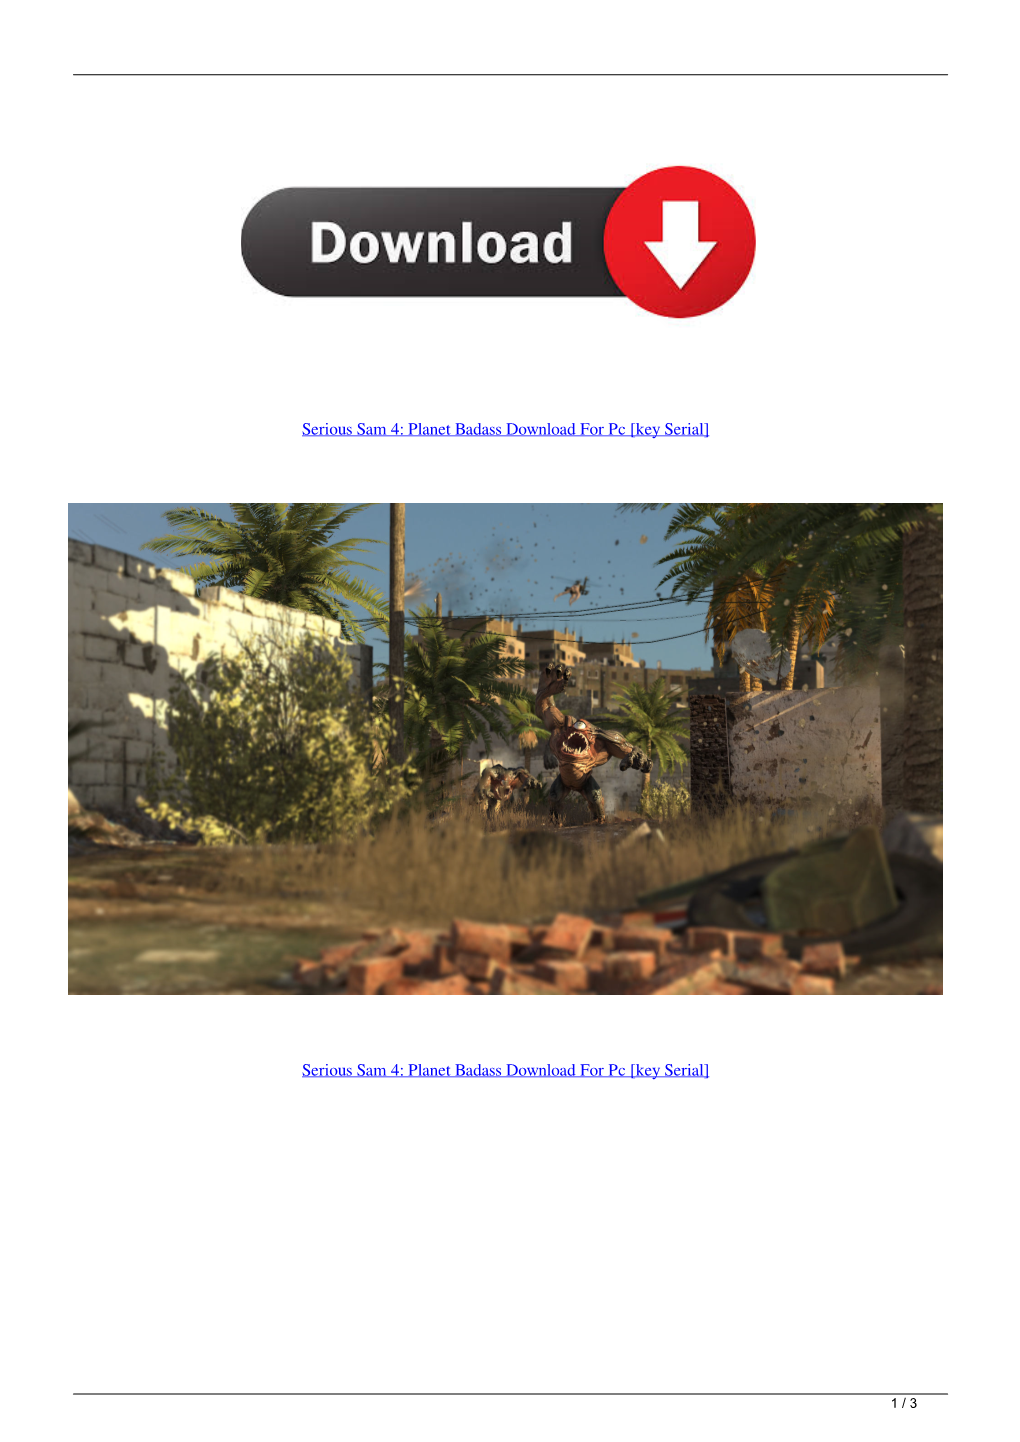 Serious Sam 4 Planet Badass Download for Pc Key Serial